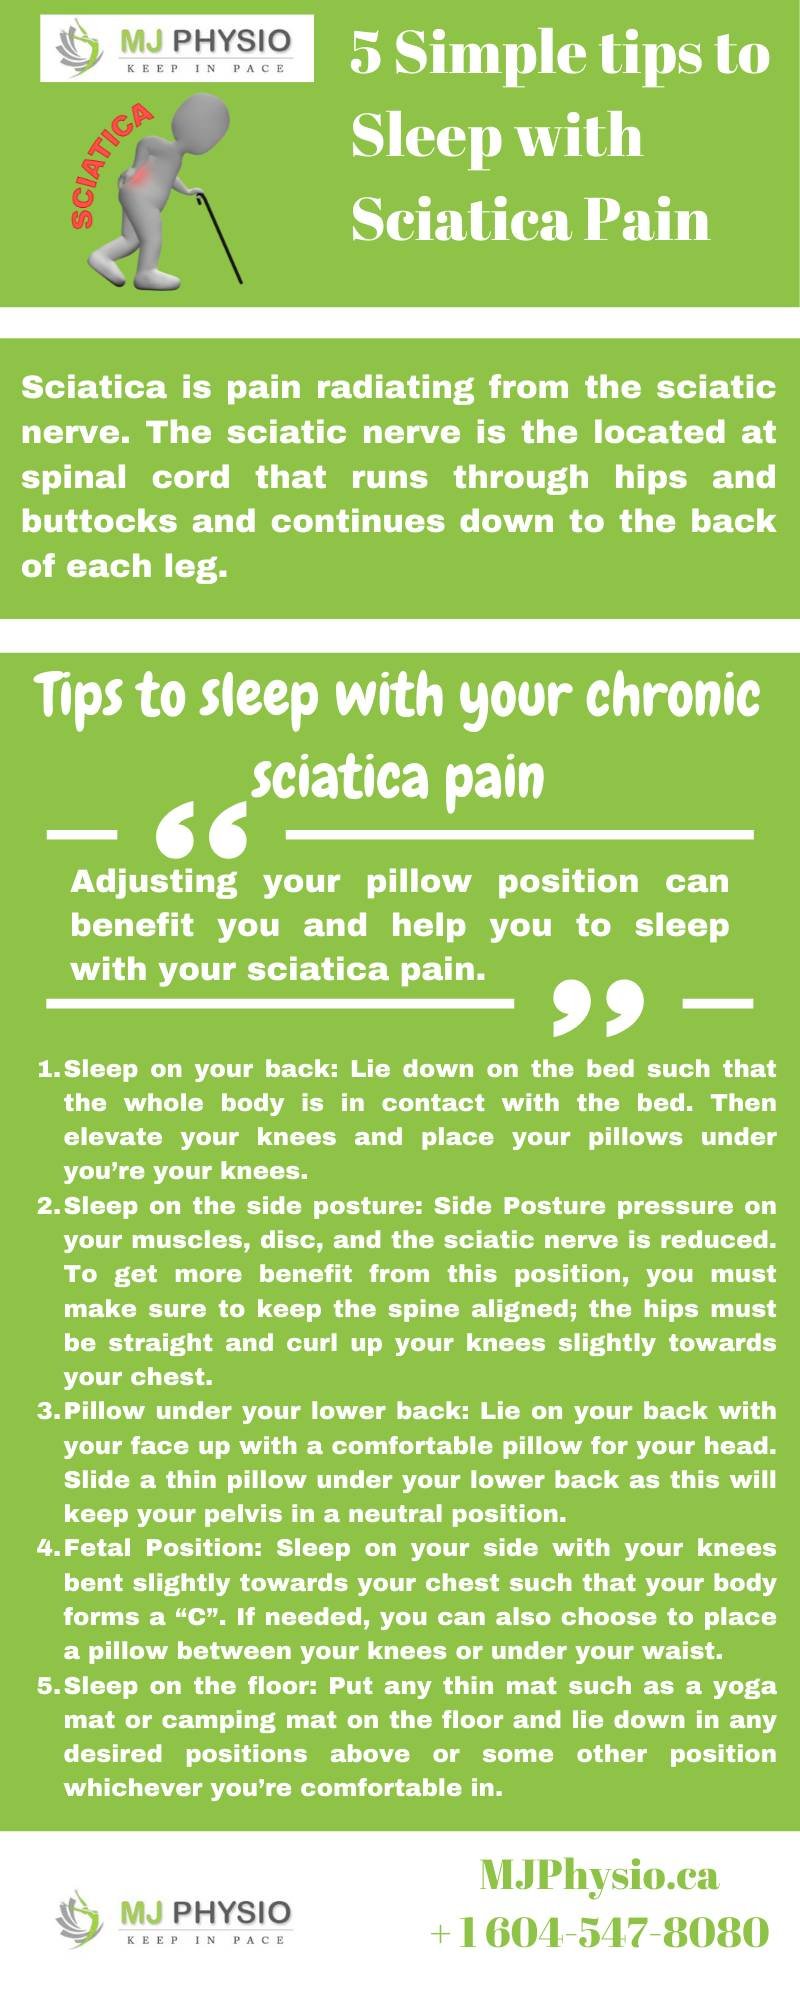 https://mjphysio.ca/wp-content/uploads/2021/07/5-Simple-tips-to-Sleep-with-Sciatica-Pain.jpg